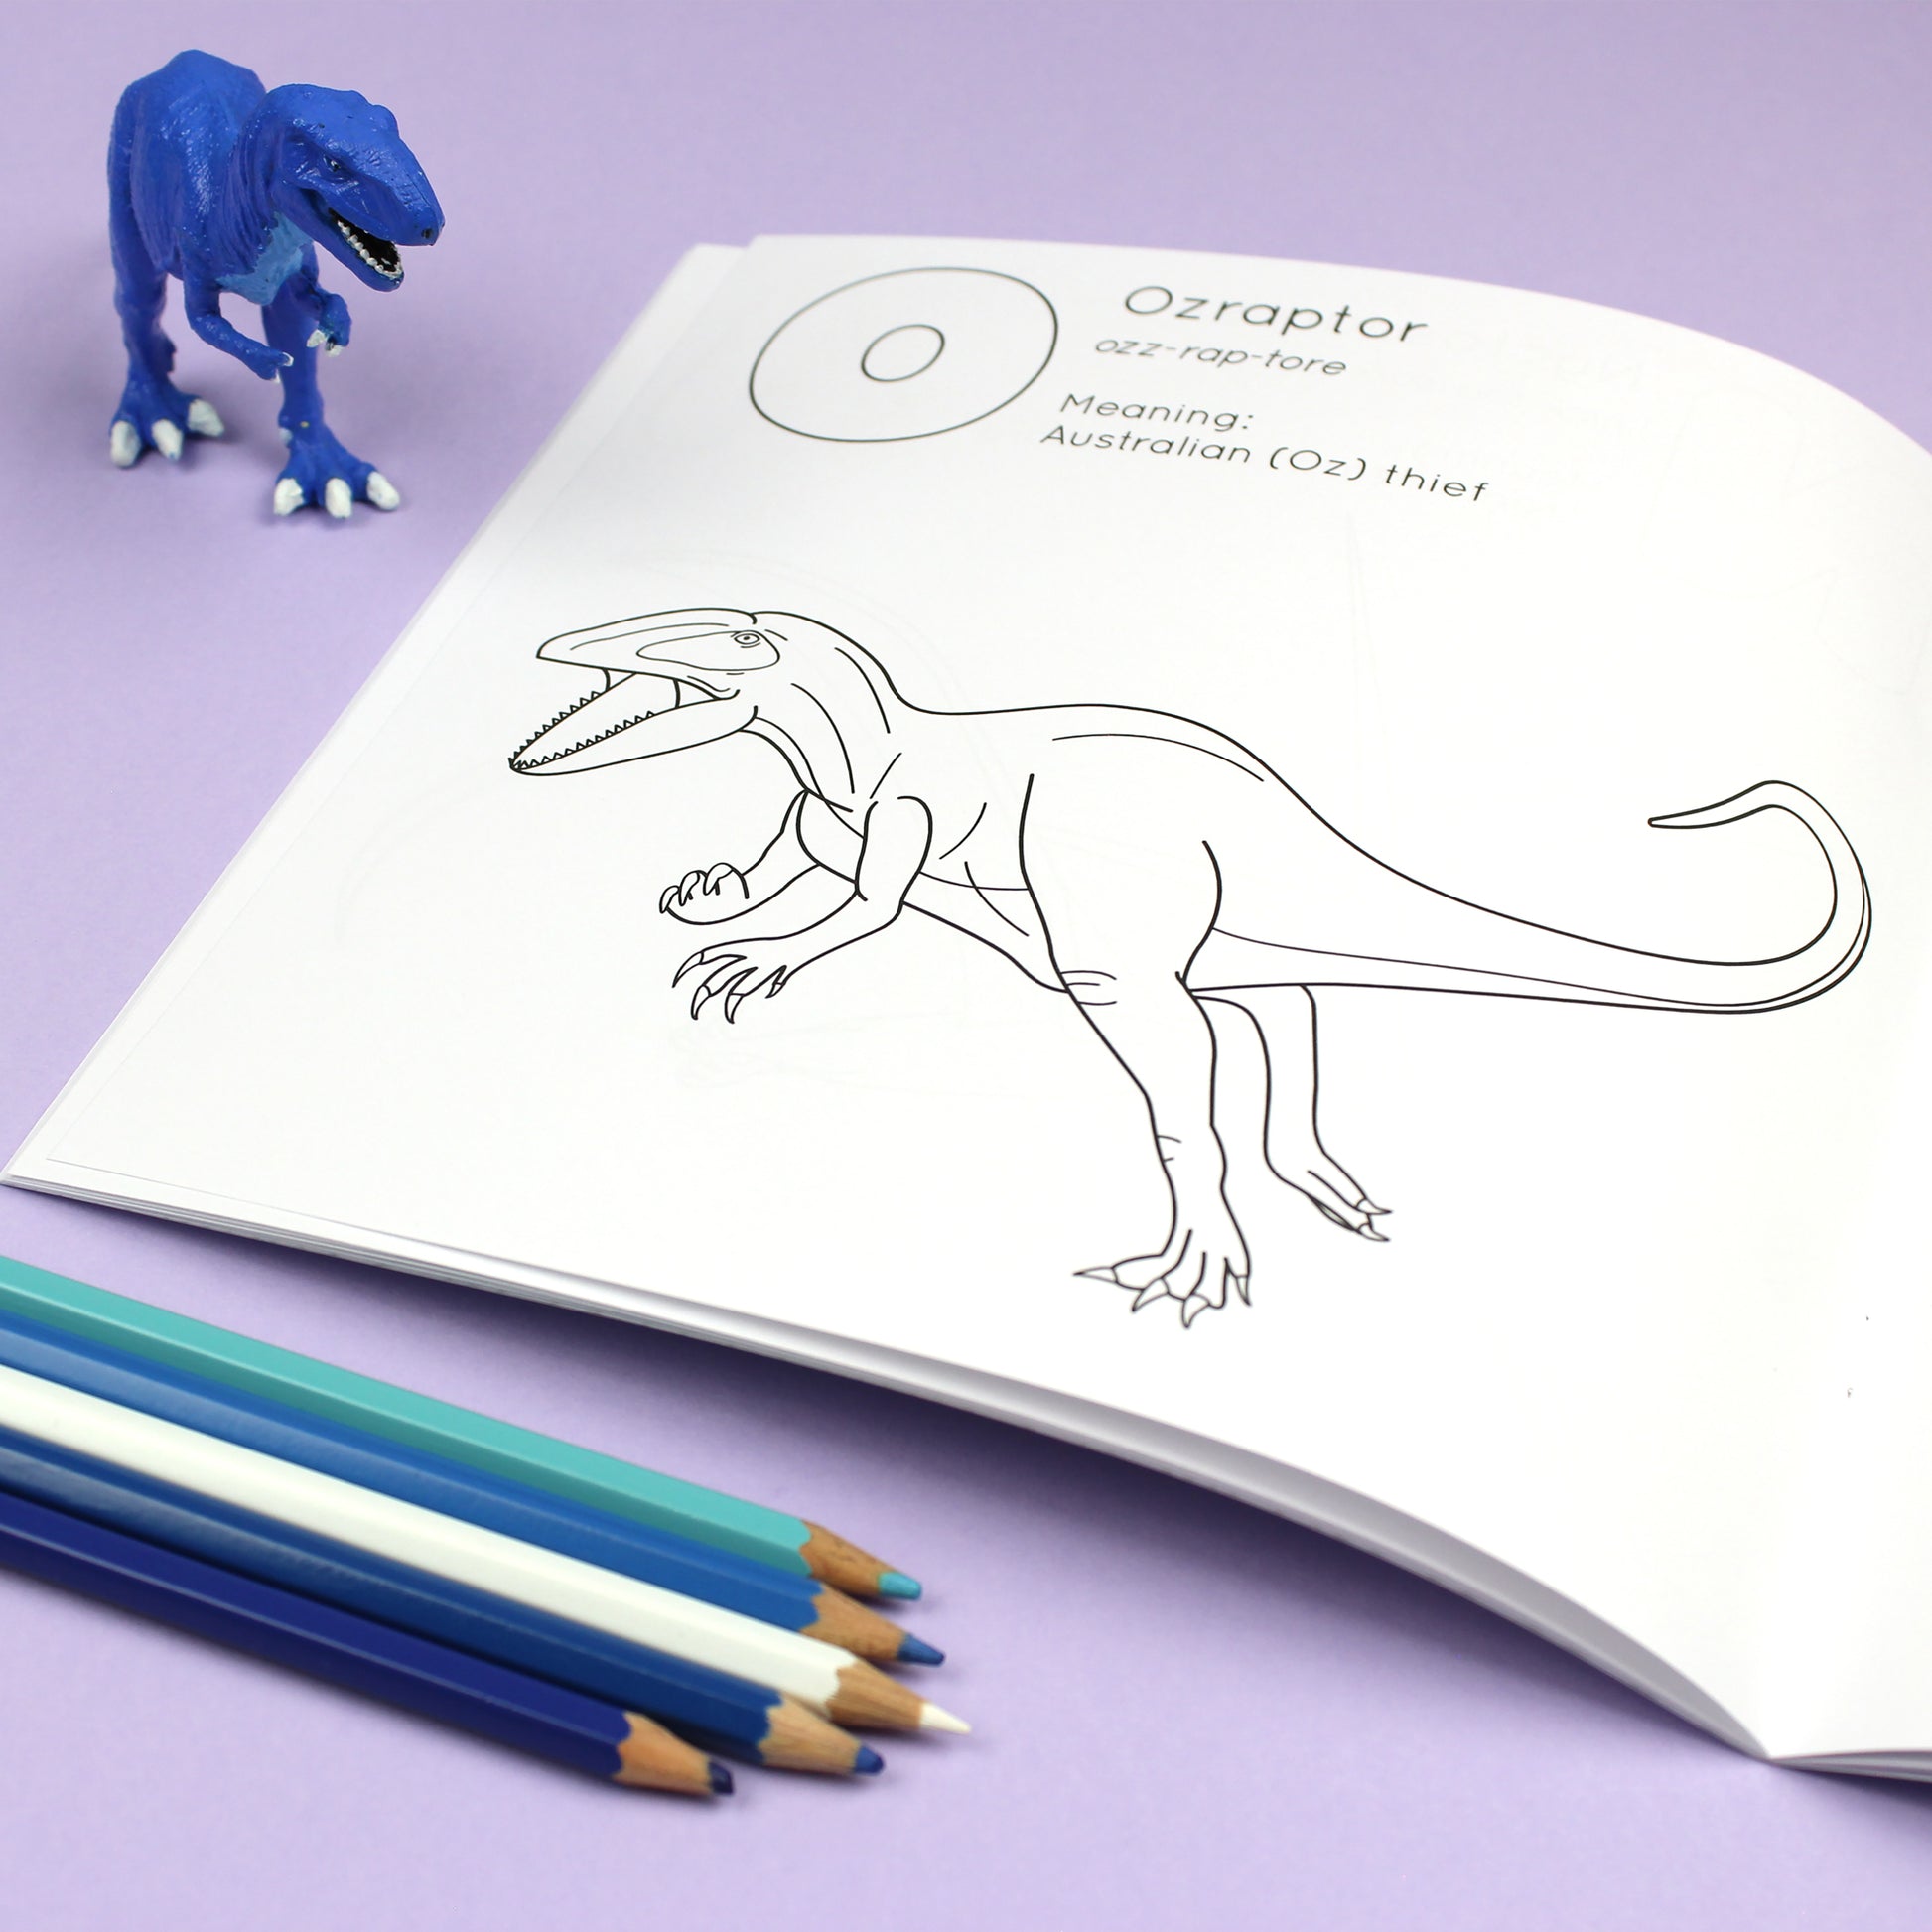 Inside page of ABC Dinosaur colouring book. The page features black line illustration of a Ozraptor dinosaur with its name, pronunciation and meaning above it.